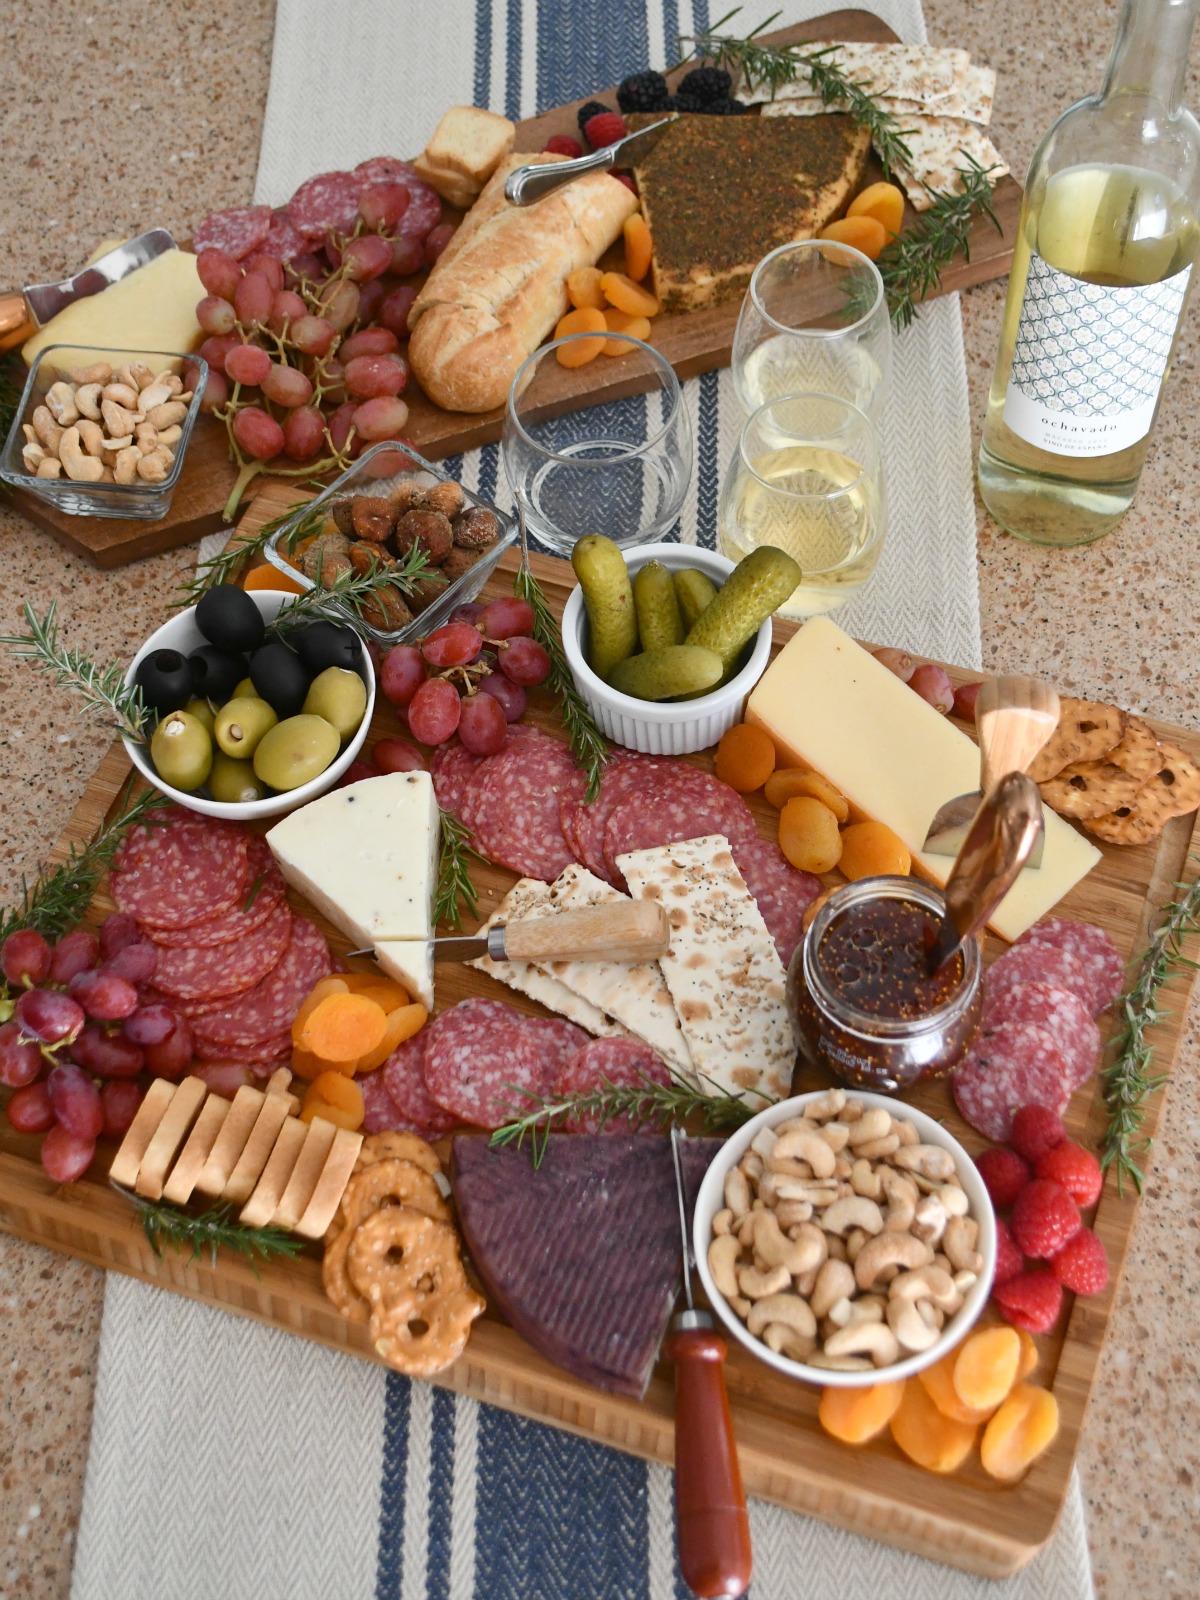 charcuterie boards with cheese assortment, wine, a bread loaf, glasses, and more